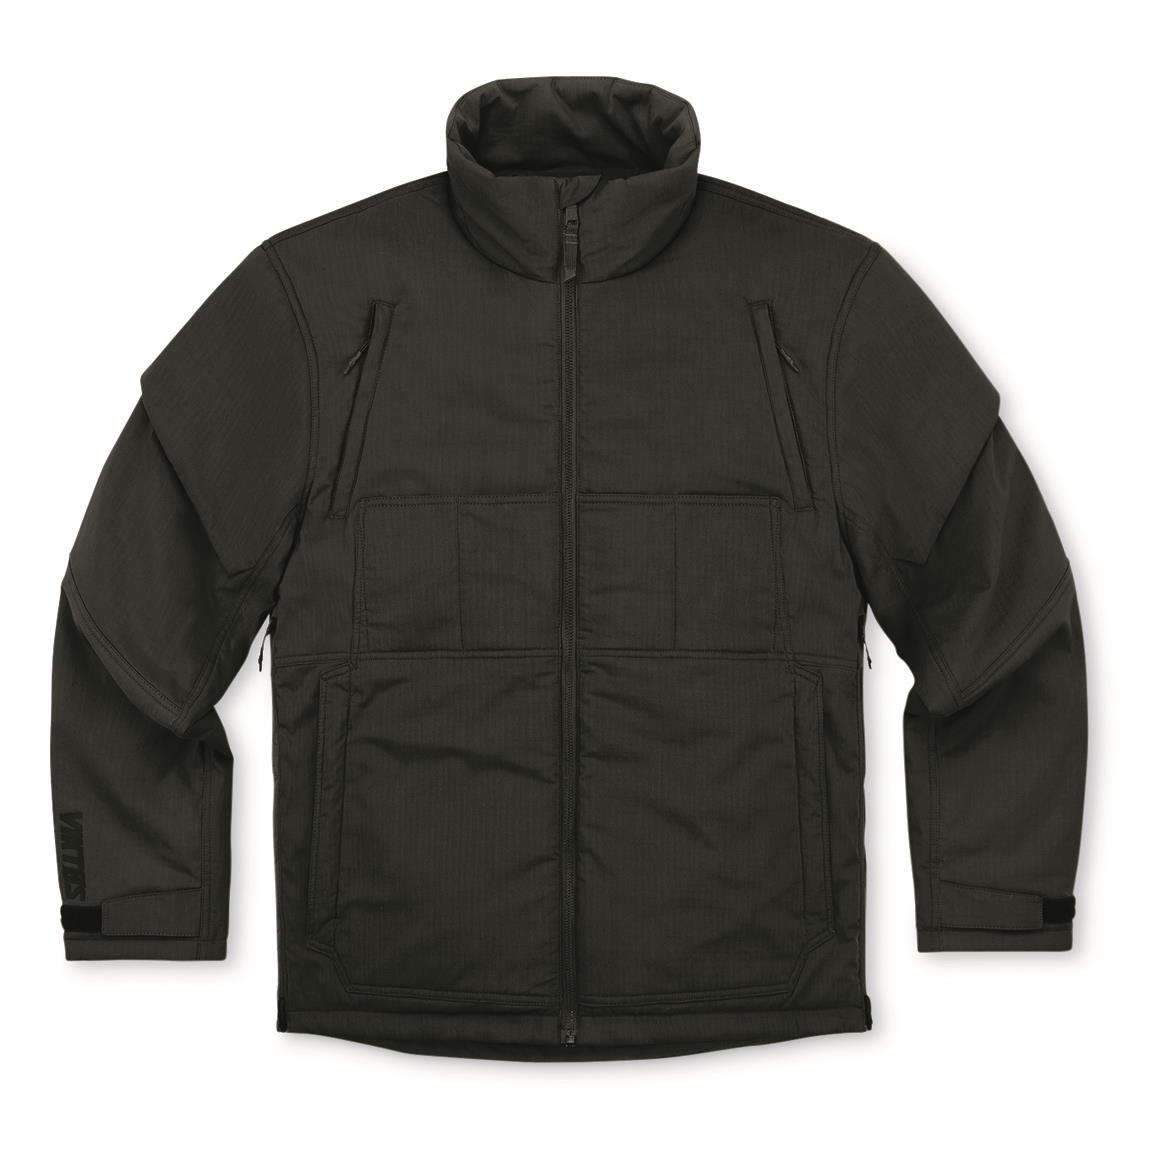 Viktos Farthermost Insulated Tactical Jacket, Black